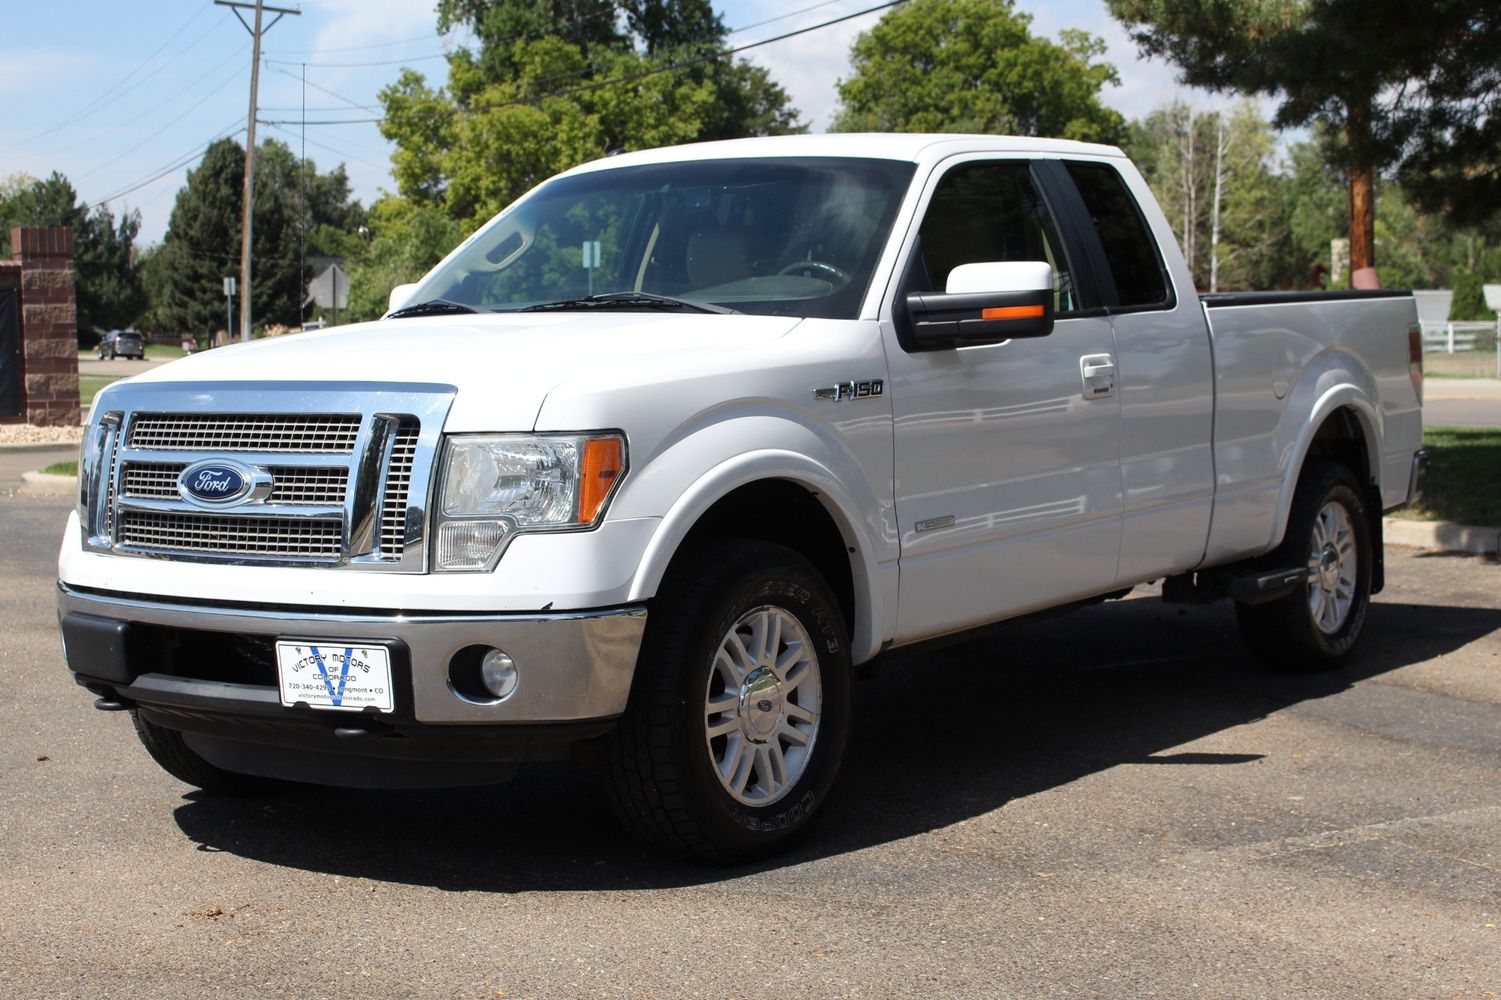 2012 Ford F-150 Lariat | Victory Motors of Colorado 2012 Ford F 150 3.7 V6 Towing Capacity